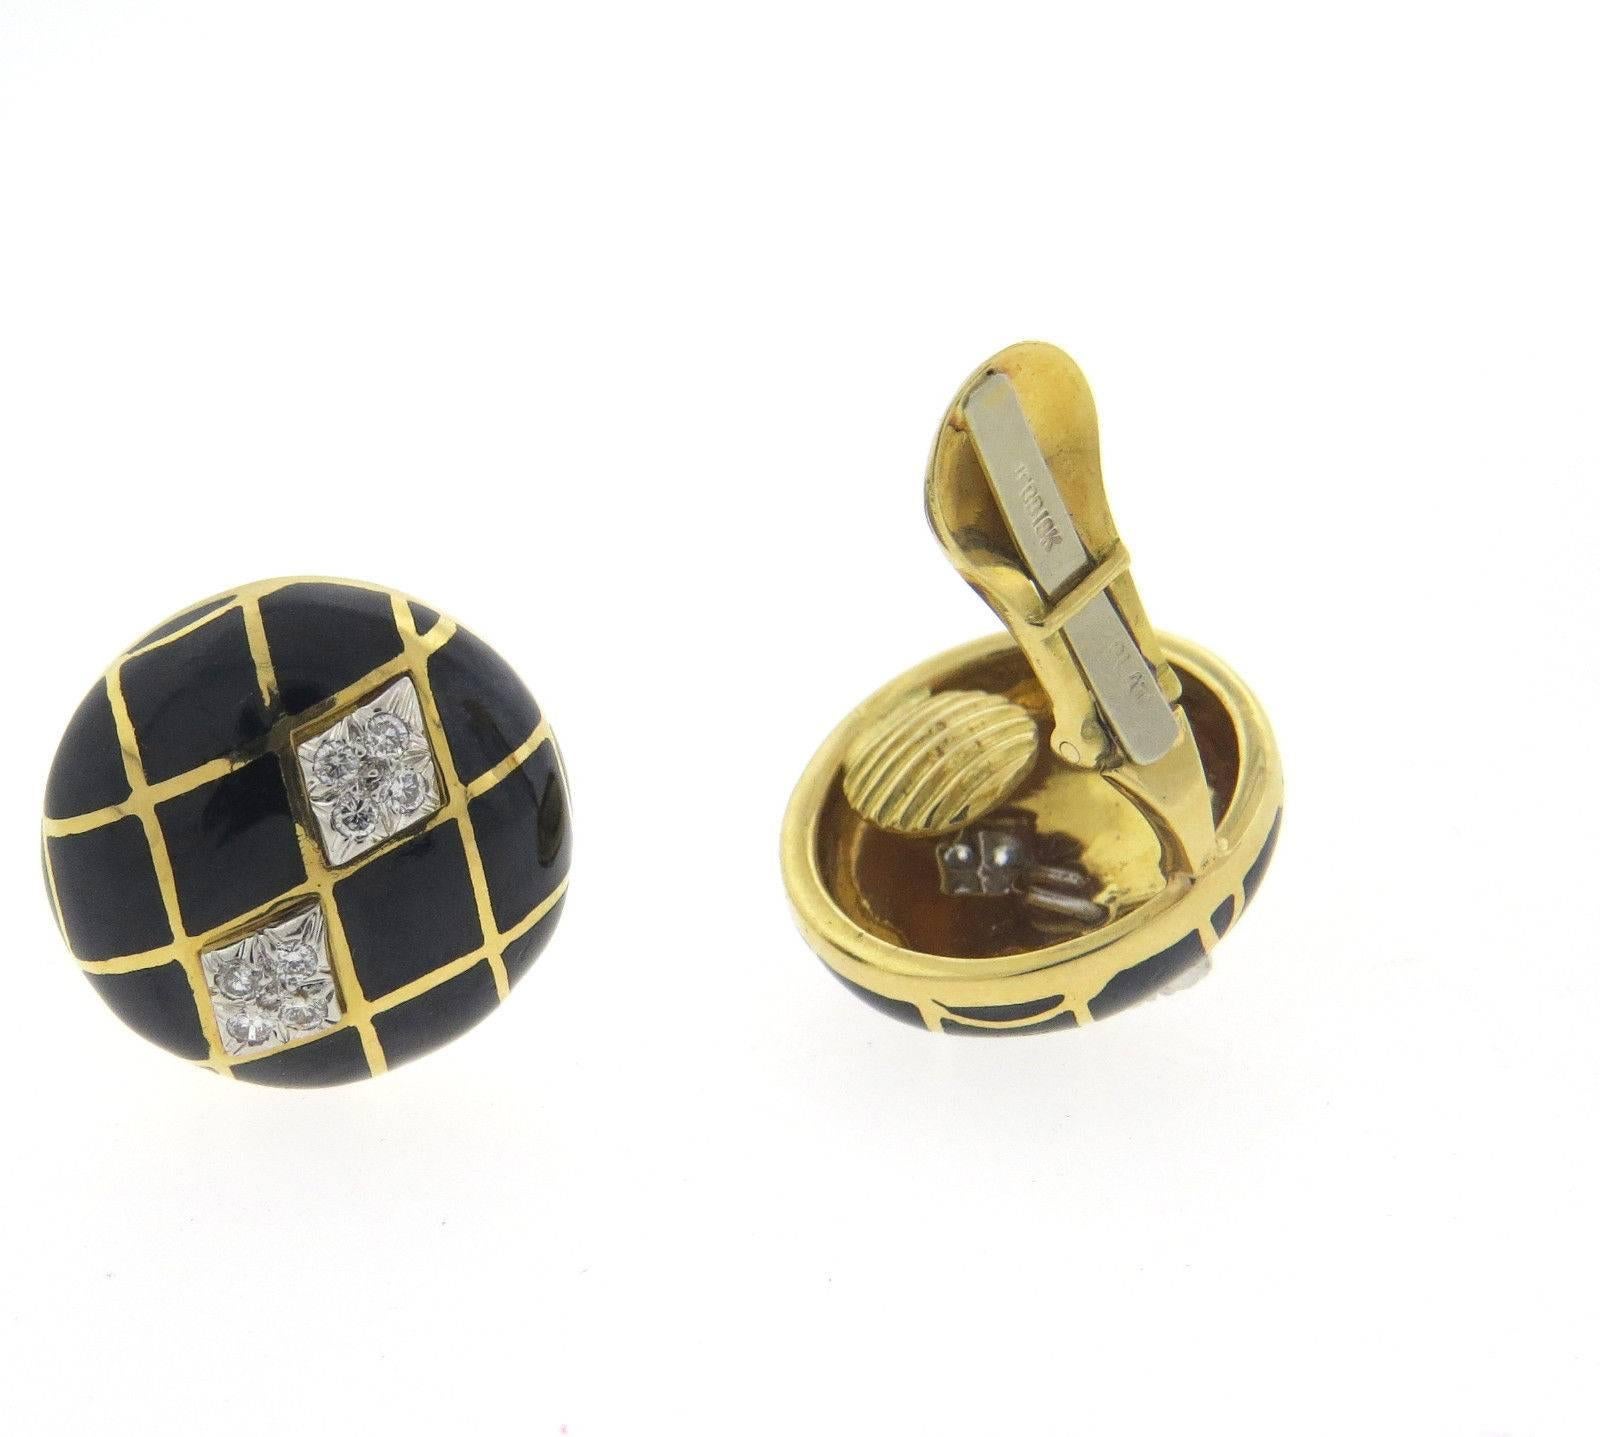 A pair of 18k yellow gold and platinum earrings adorned with black enamel and approximately 0.48ctw of H/VS diamonds.  Crafted by David Webb, the earrings measure mm in diameter and weigh 25.5 grams.  Marked: Webb, 18k plat 